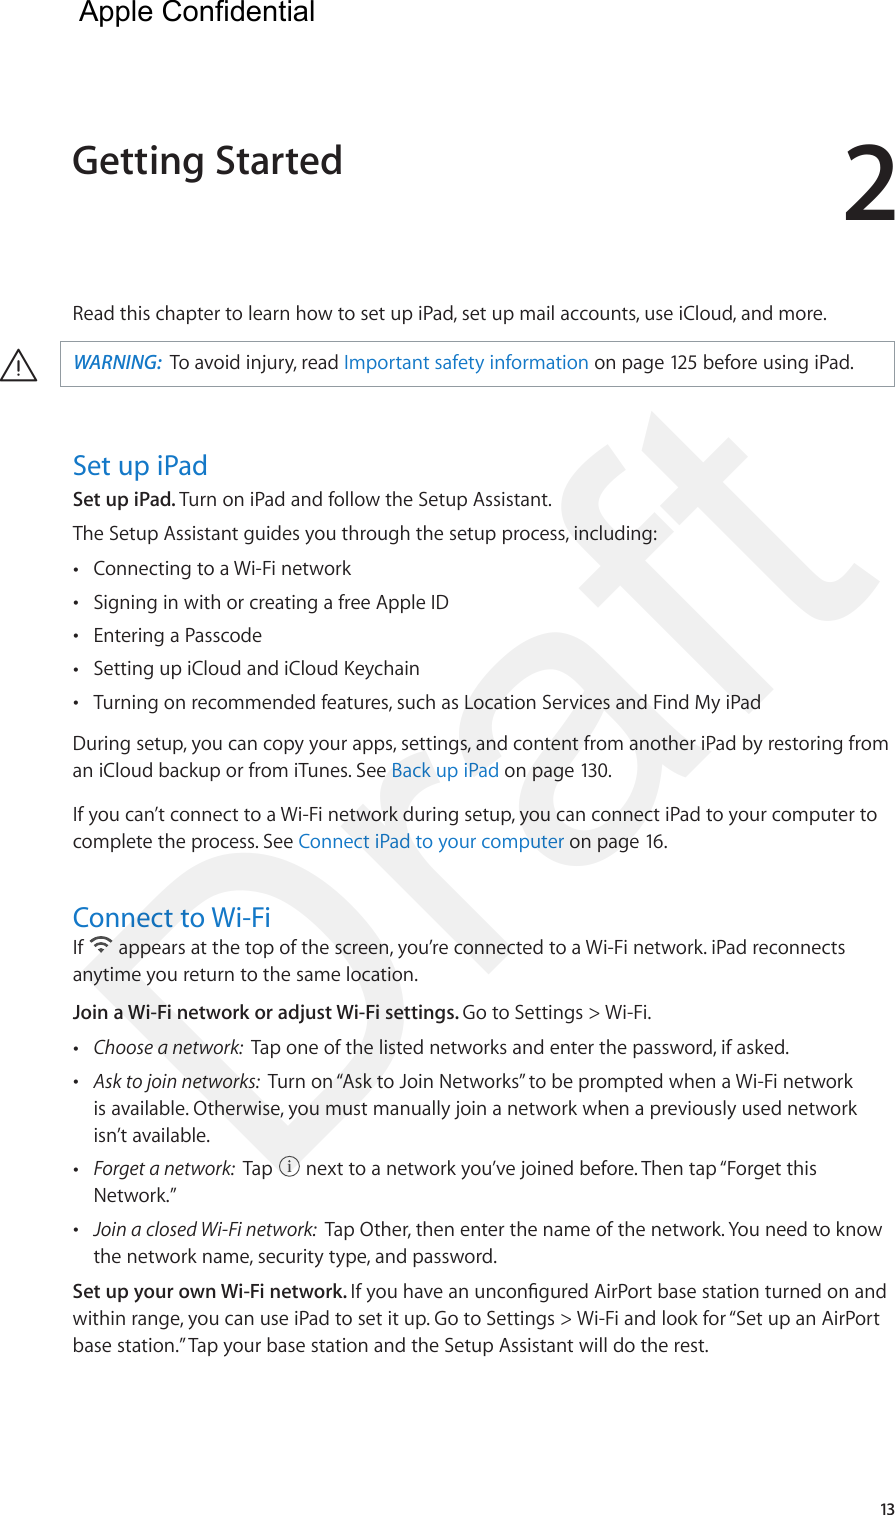 213Read this chapter to learn how to set up iPad, set up mail accounts, use iCloud, and more. ·WARNING:  To avoid injury, read Important safety information on page 125 before using iPad.Set up iPadSet up iPad. Turn on iPad and follow the Setup Assistant.The Setup Assistant guides you through the setup process, including:  •Connecting to a Wi-Fi network •Signing in with or creating a free Apple ID •Entering a Passcode •Setting up iCloud and iCloud Keychain •Turning on recommended features, such as Location Services and Find My iPadDuring setup, you can copy your apps, settings, and content from another iPad by restoring from an iCloud backup or from iTunes. See Back up iPad on page 130.If you can’t connect to a Wi-Fi network during setup, you can connect iPad to your computer to complete the process. See Connect iPad to your computer on page 16.Connect to Wi-FiIf   appears at the top of the screen, you’re connected to a Wi-Fi network. iPad reconnects anytime you return to the same location.Join a Wi-Fi network or adjust Wi-Fi settings. Go to Settings &gt; Wi-Fi. •Choose a network:  Tap one of the listed networks and enter the password, if asked. •Ask to join networks:  Turn on “Ask to Join Networks” to be prompted when a Wi-Fi networkis available. Otherwise, you must manually join a network when a previously used networkisn’t available. •Forget a network:  Tap   next to a network you’ve joined before. Then tap “Forget thisNetwork.” •Join a closed Wi-Fi network:  Tap Other, then enter the name of the network. You need to knowthe network name, security type, and password.Set up your own Wi-Fi network. If you have an uncongured AirPort base station turned on and within range, you can use iPad to set it up. Go to Settings &gt; Wi-Fi and look for “Set up an AirPort base station.” Tap your base station and the Setup Assistant will do the rest.Getting Started  Apple Confidential Draft